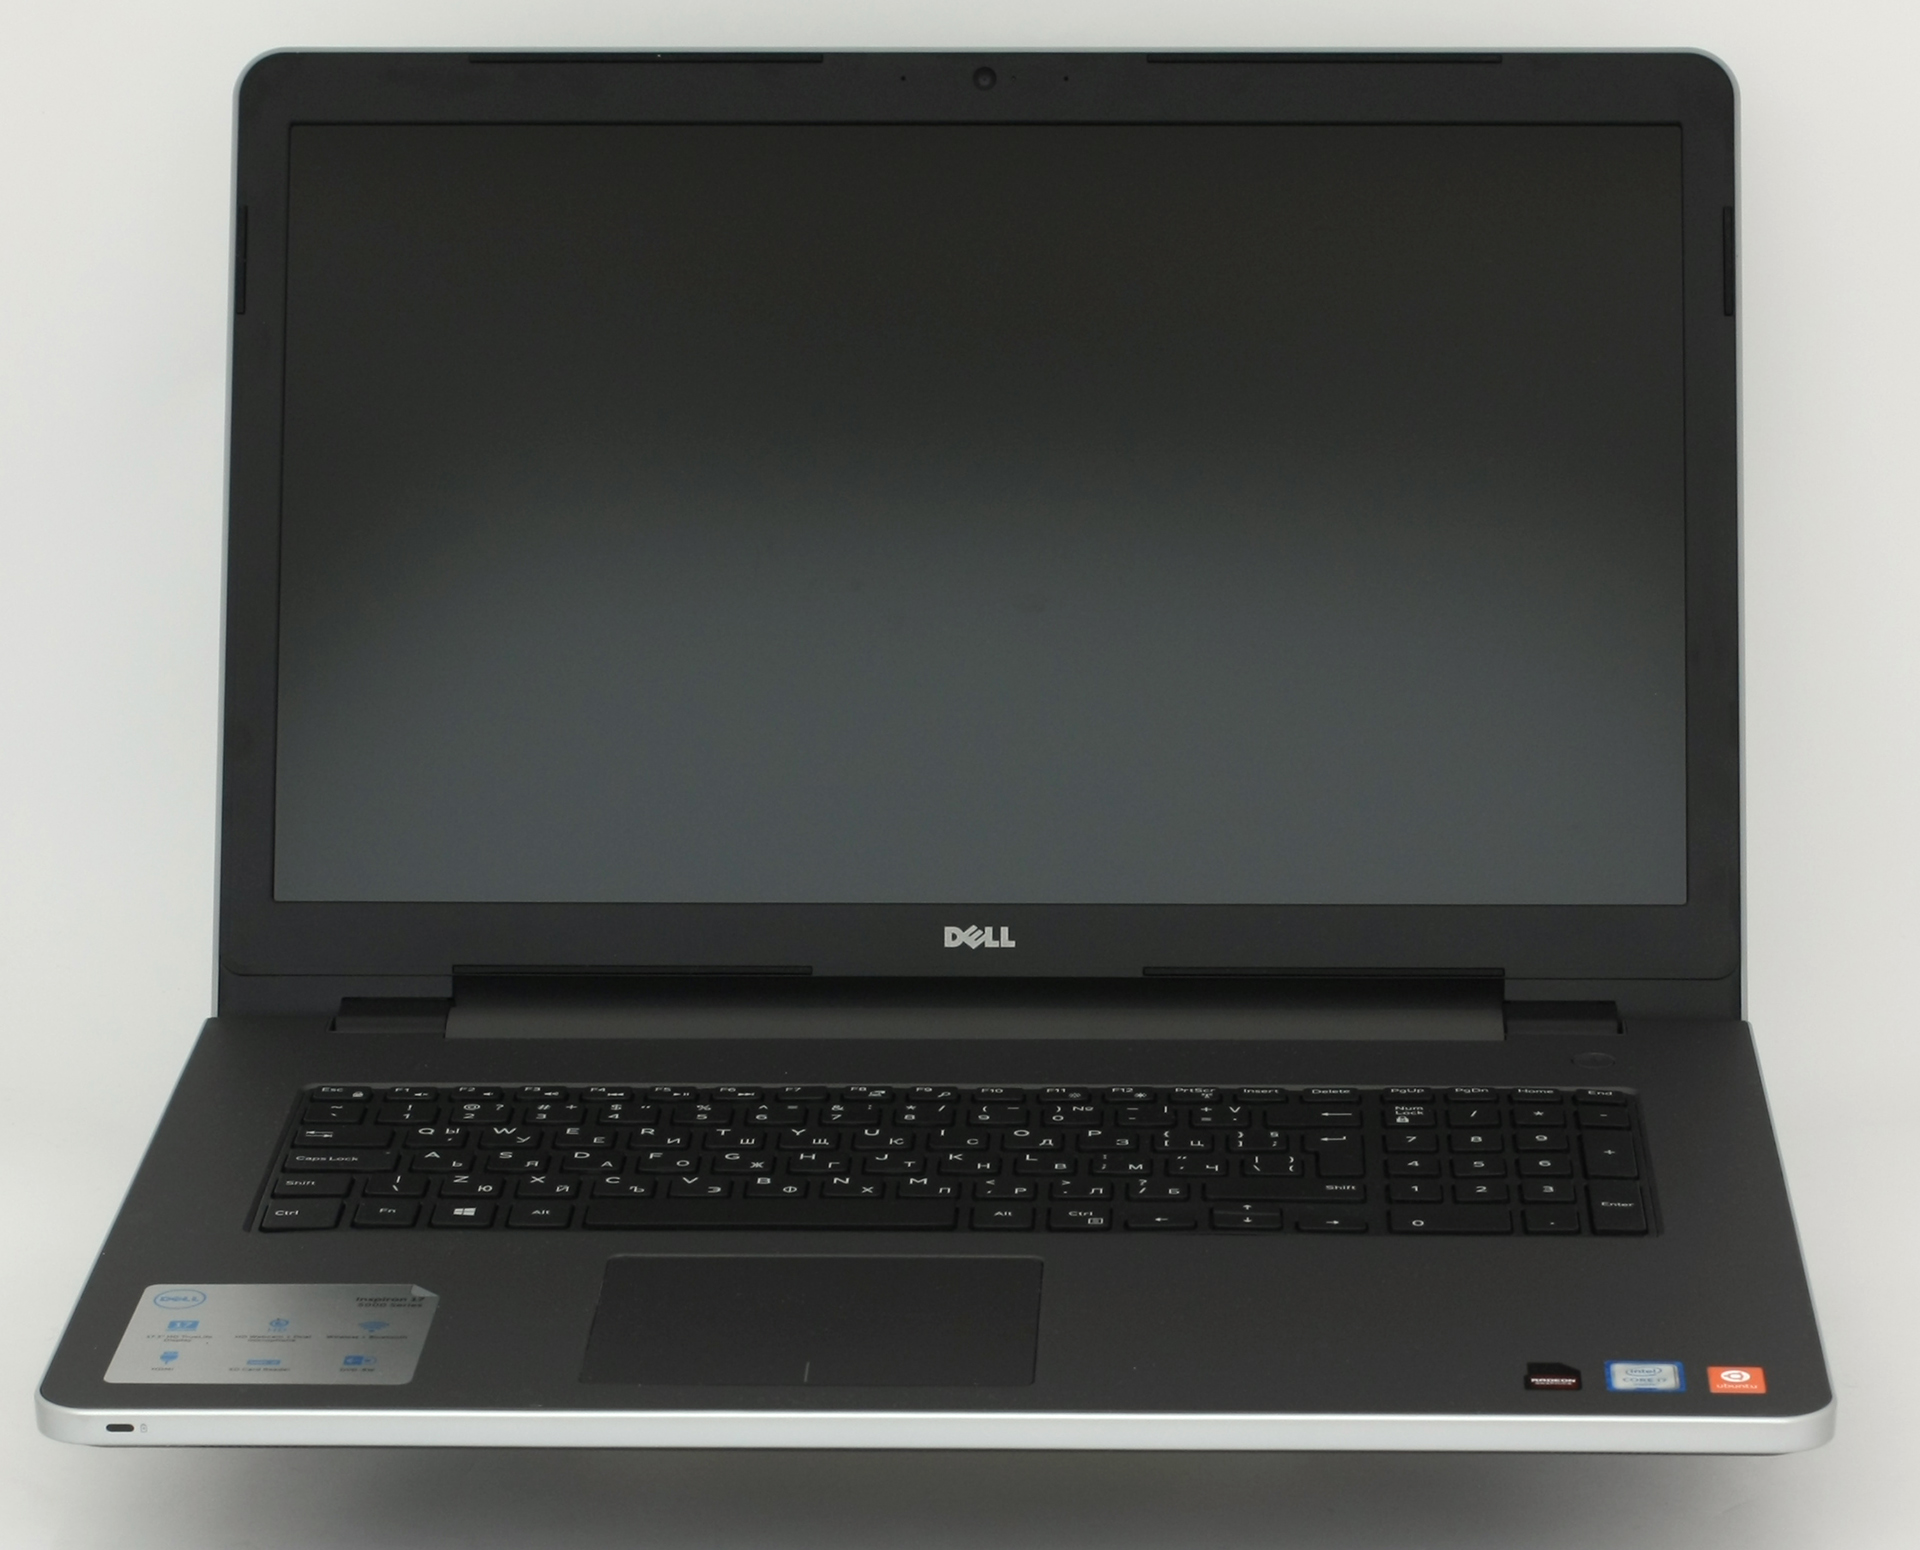 Dell Inspiron 5759 review - a logical successor to the 5758 with a 